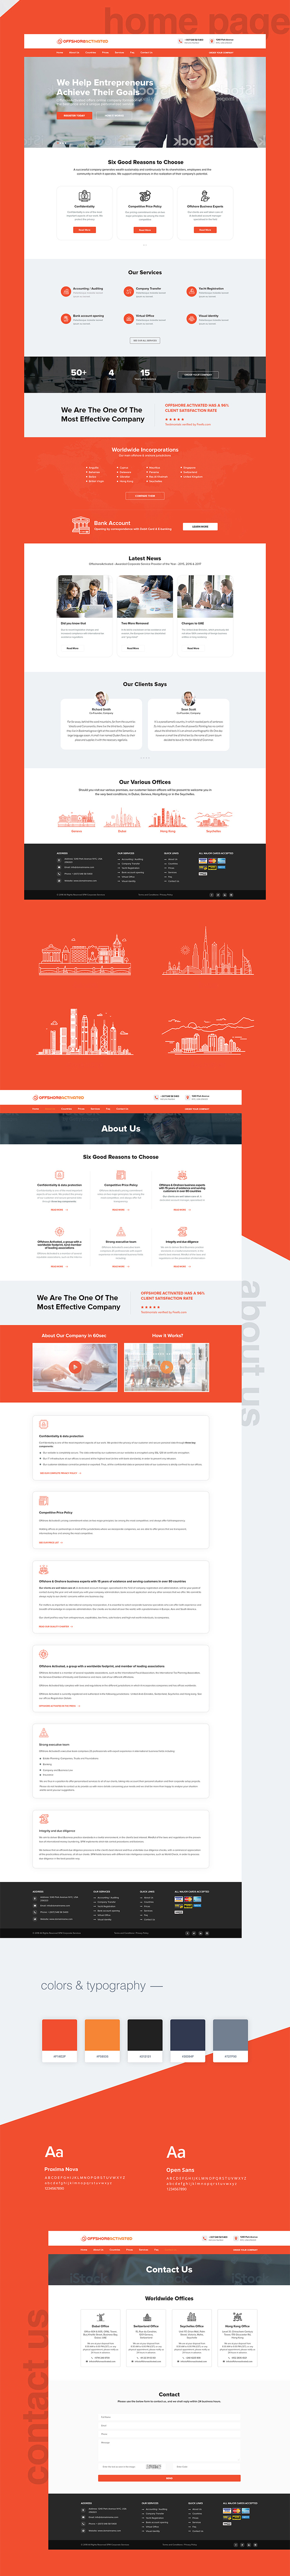 Free Download Creative Offshore Activated Web Design (PSD)